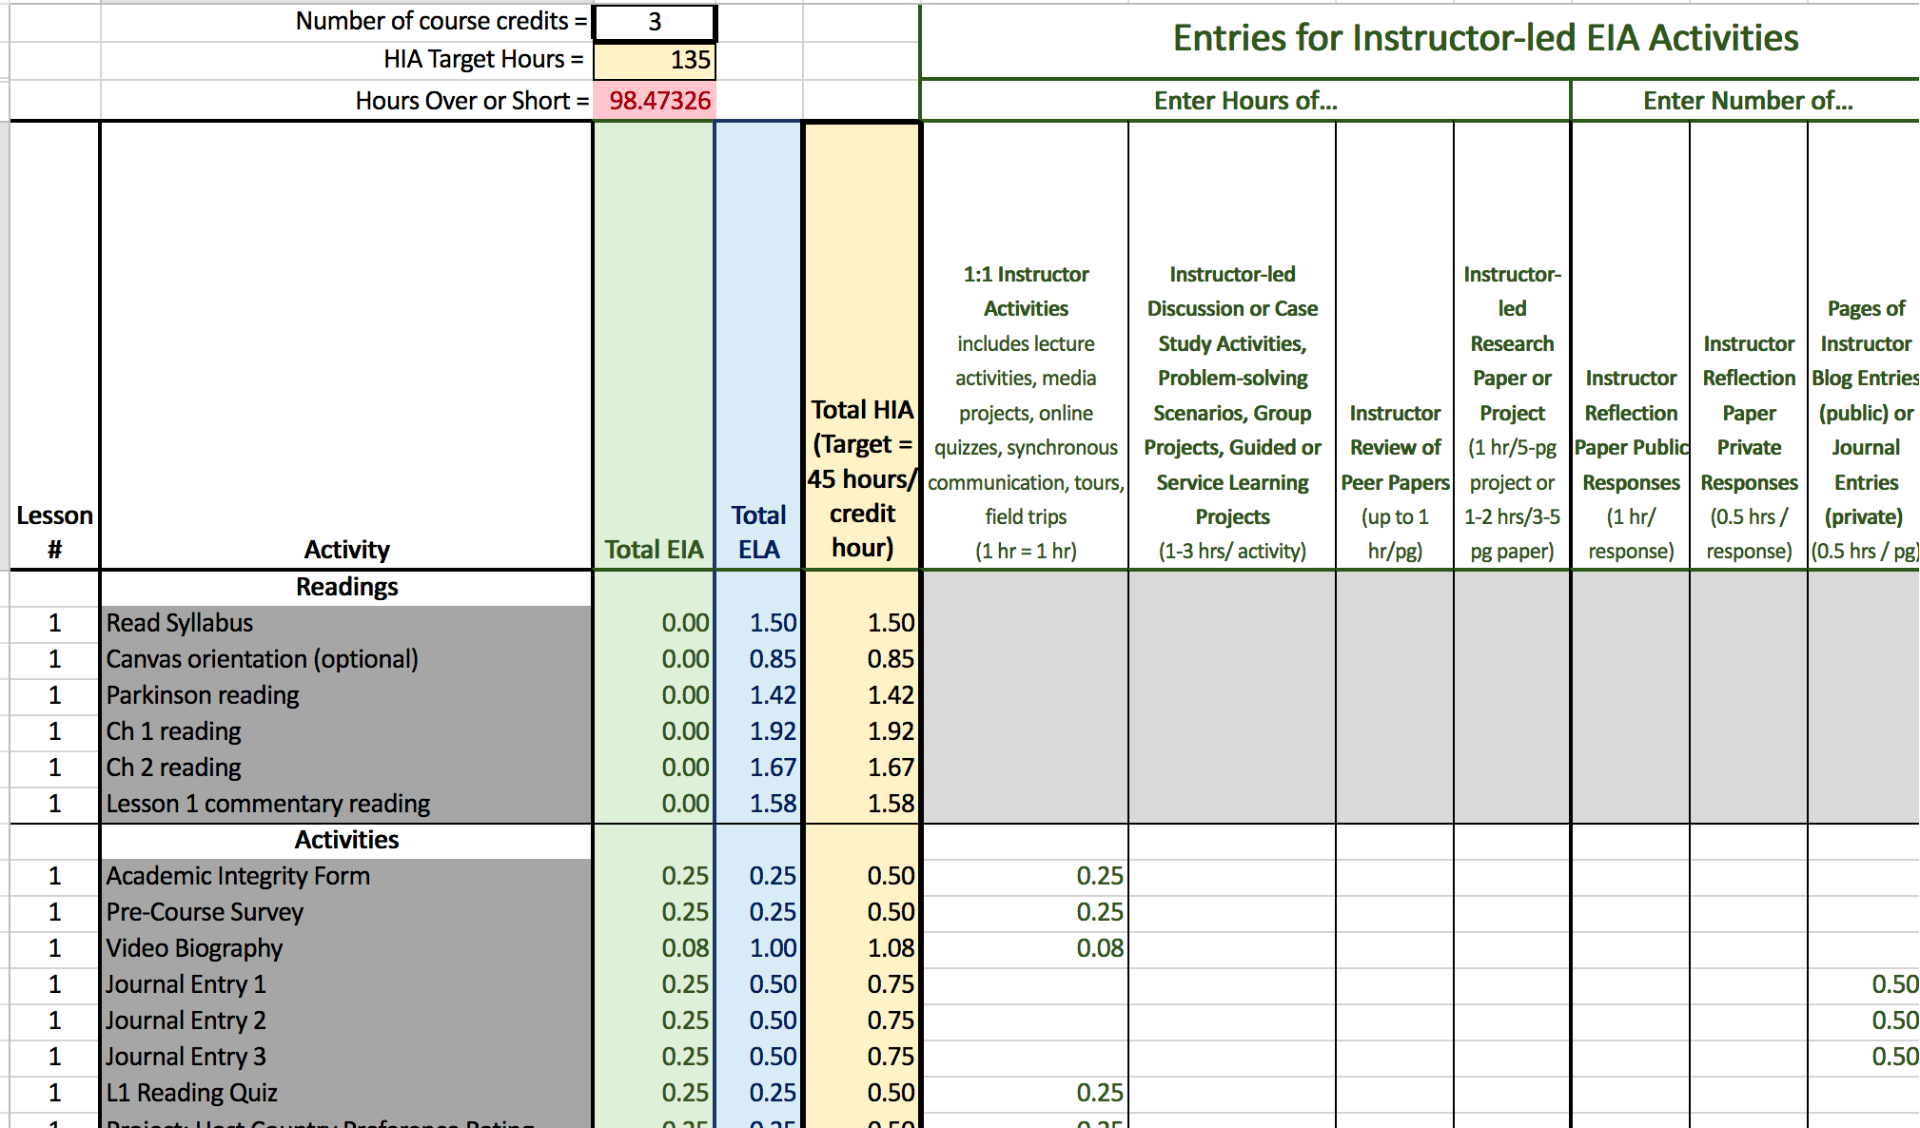 Spreadsheet showing colums for the number of EIA, ELA, and activity types. Rows for each activity.